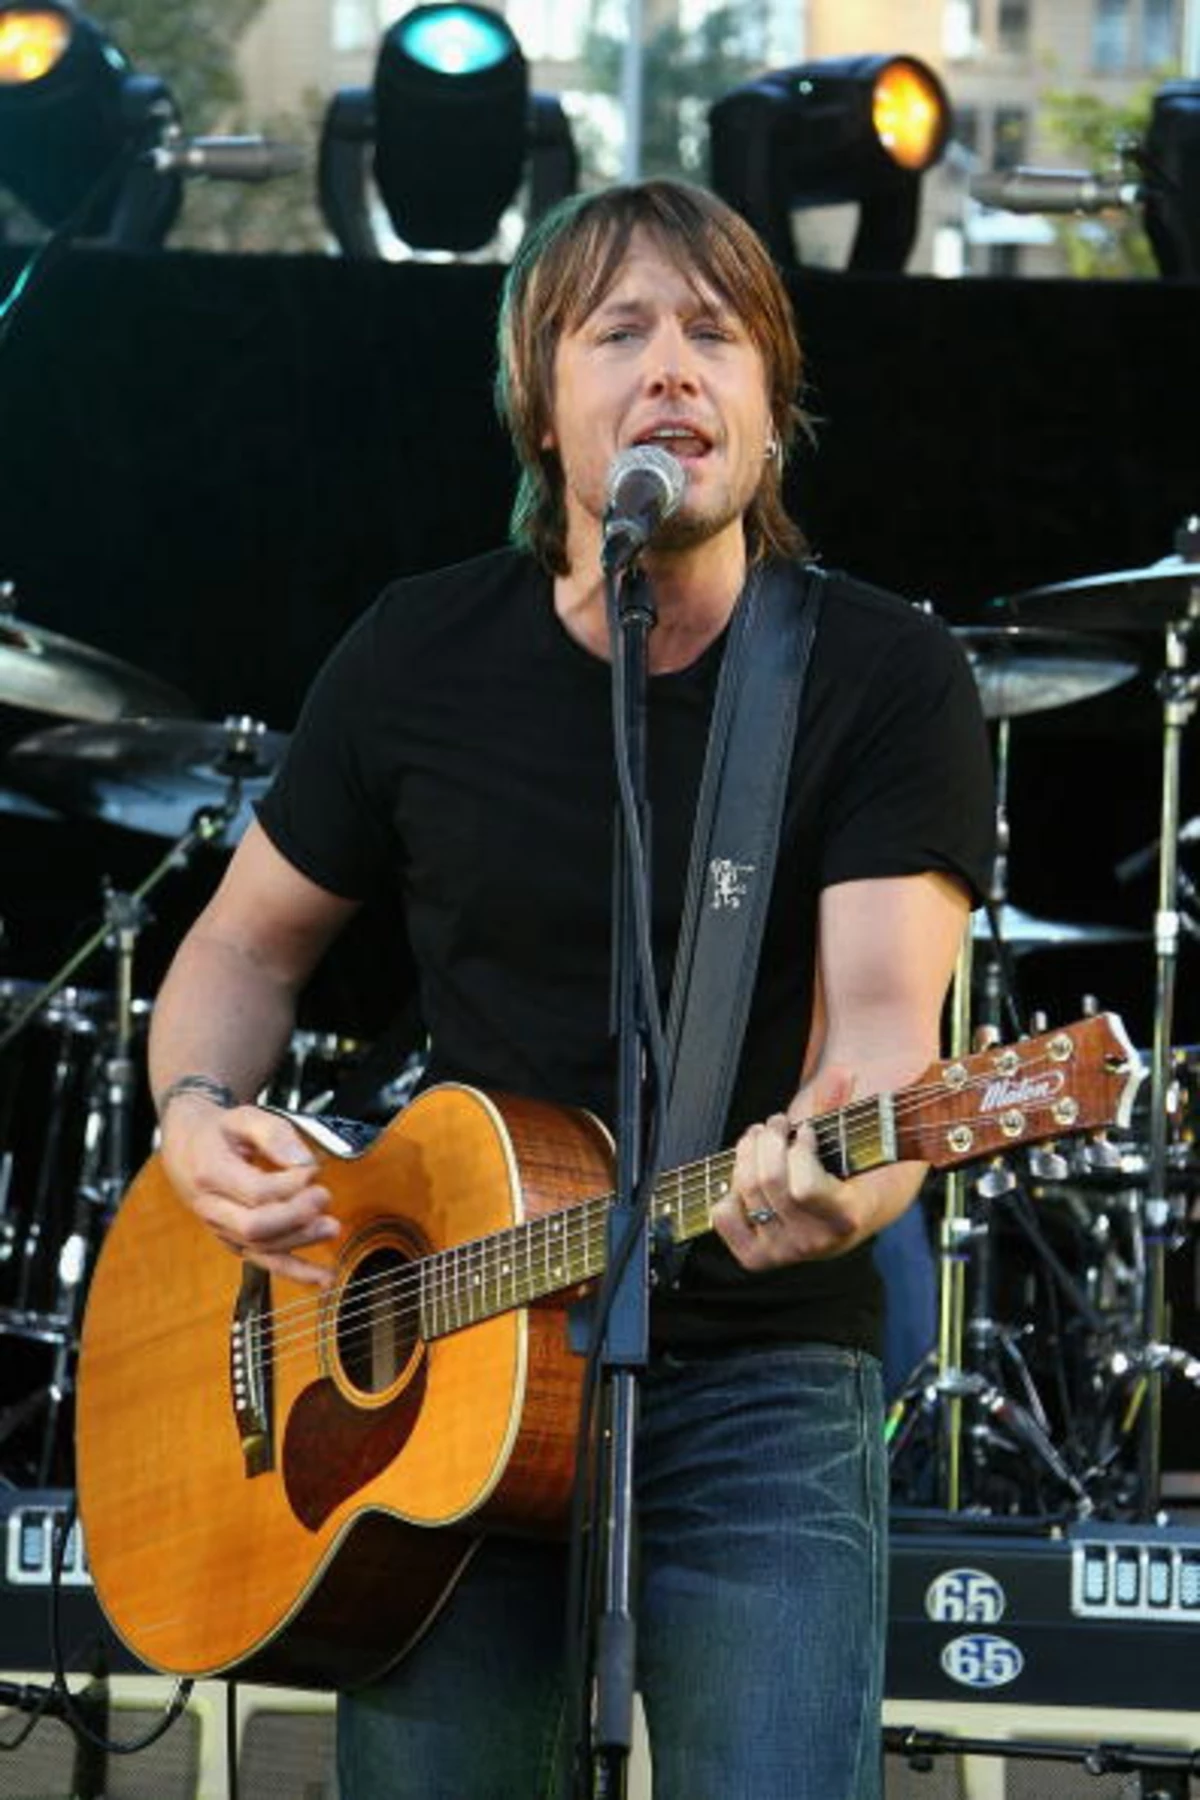 New Music From Keith Urban Tomorrow Night At CMT AwardsListen For Yourself